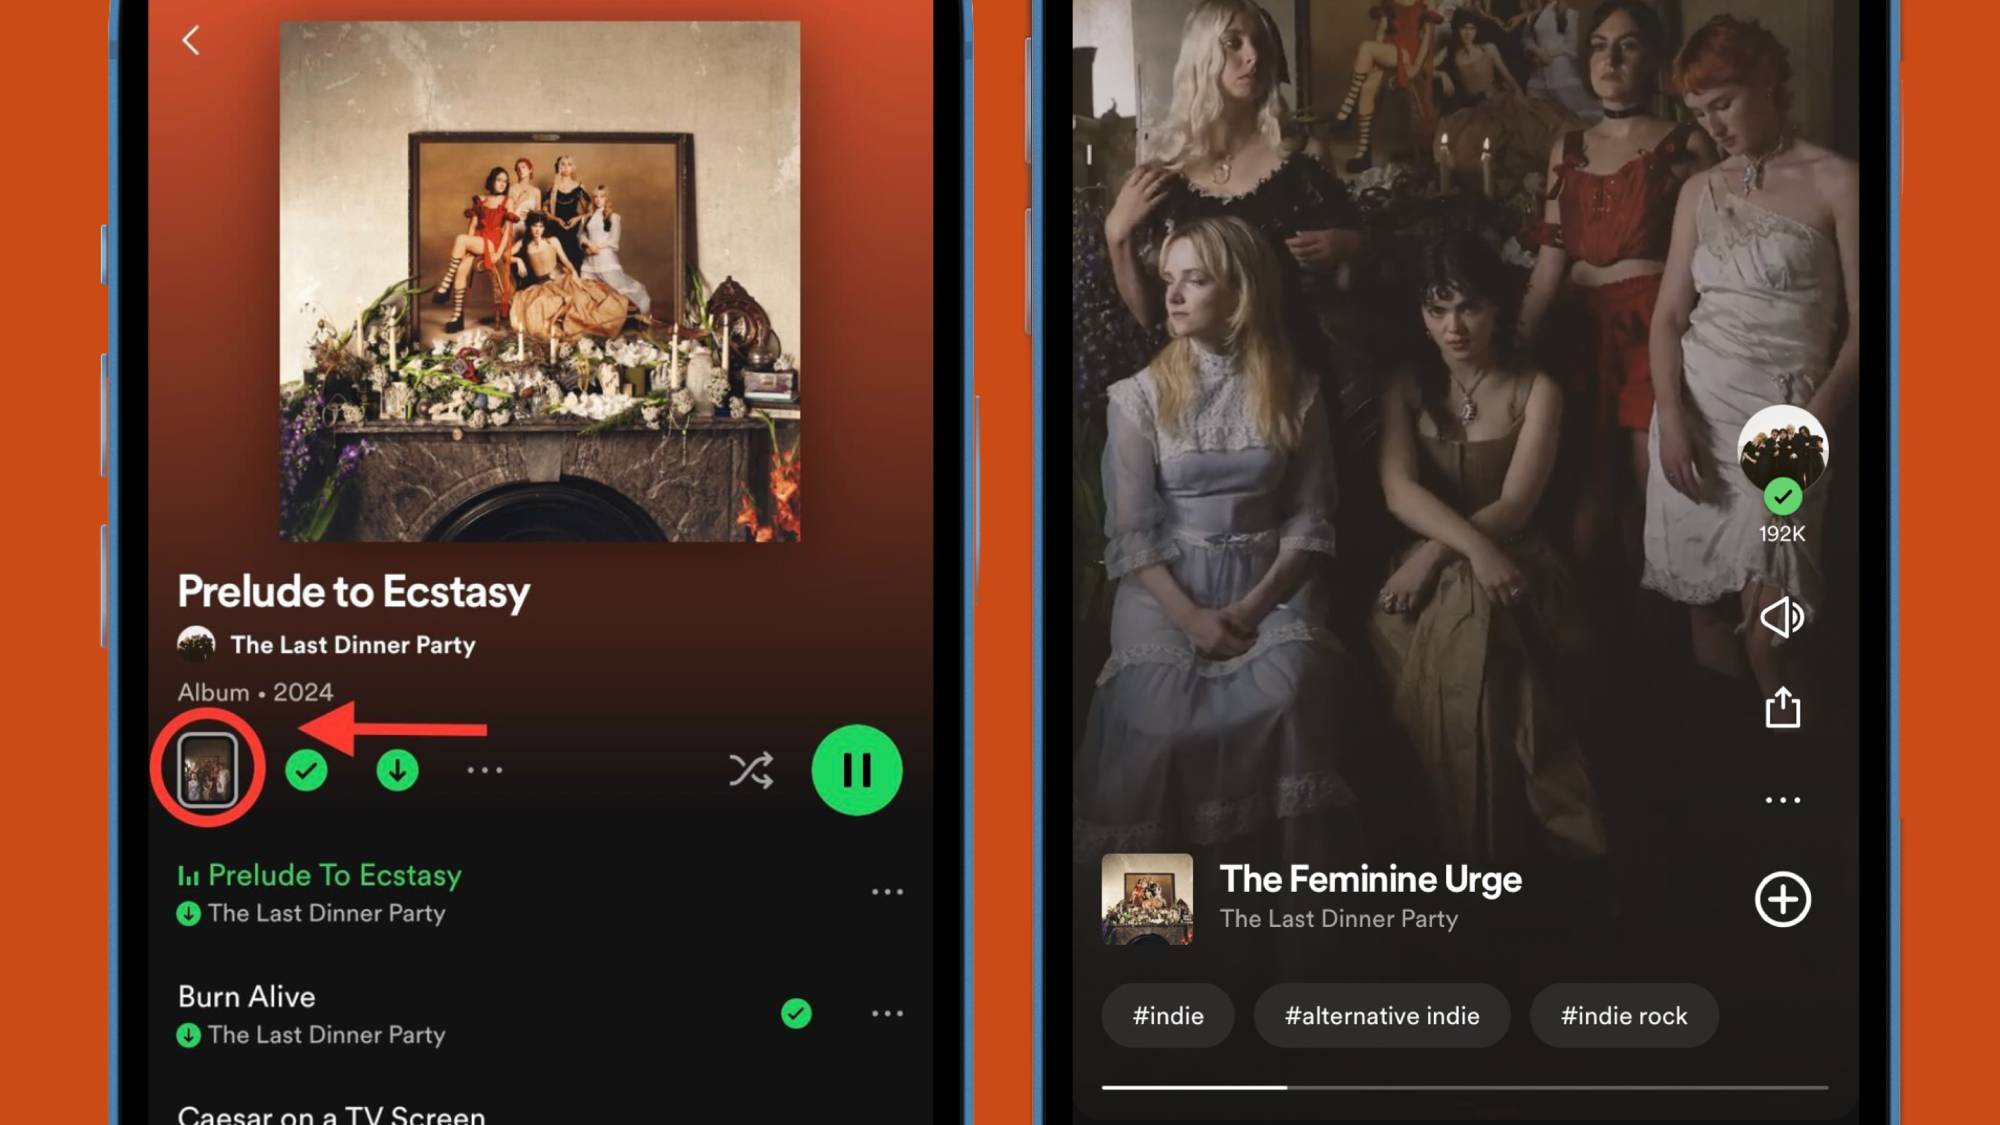 Will this new Spotify video feature change the way we listen to